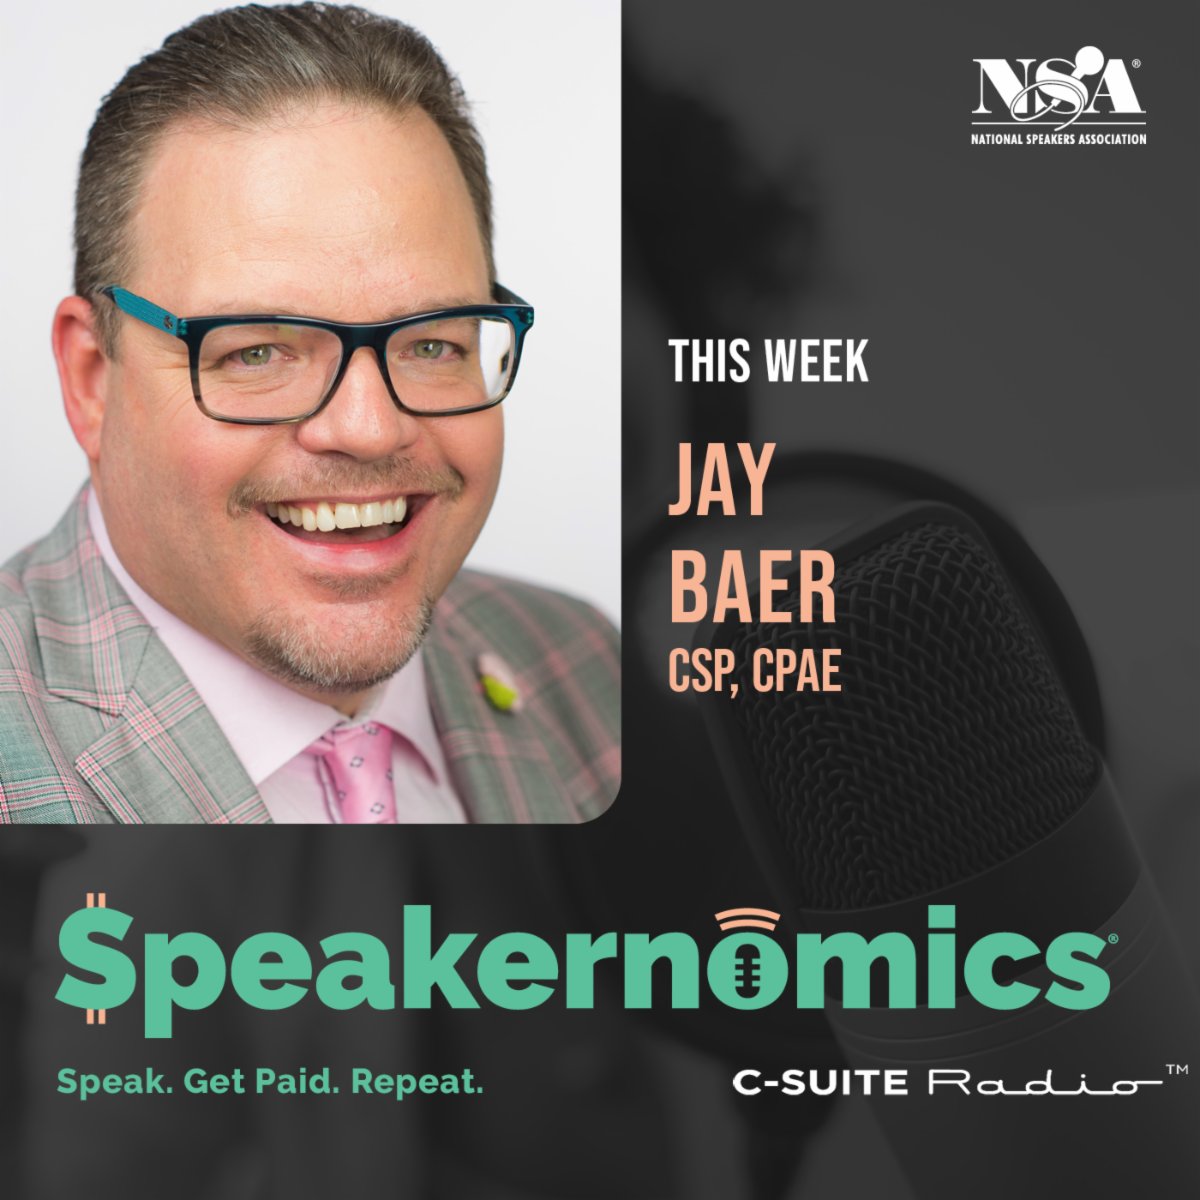 This week on Speakernomics we invited Jay to share his insights about how to differentiate yourself from other speakers so meeting planners choose to work with you. Listen to Speakernomics: nsaspeaker.org/benefit/speake…